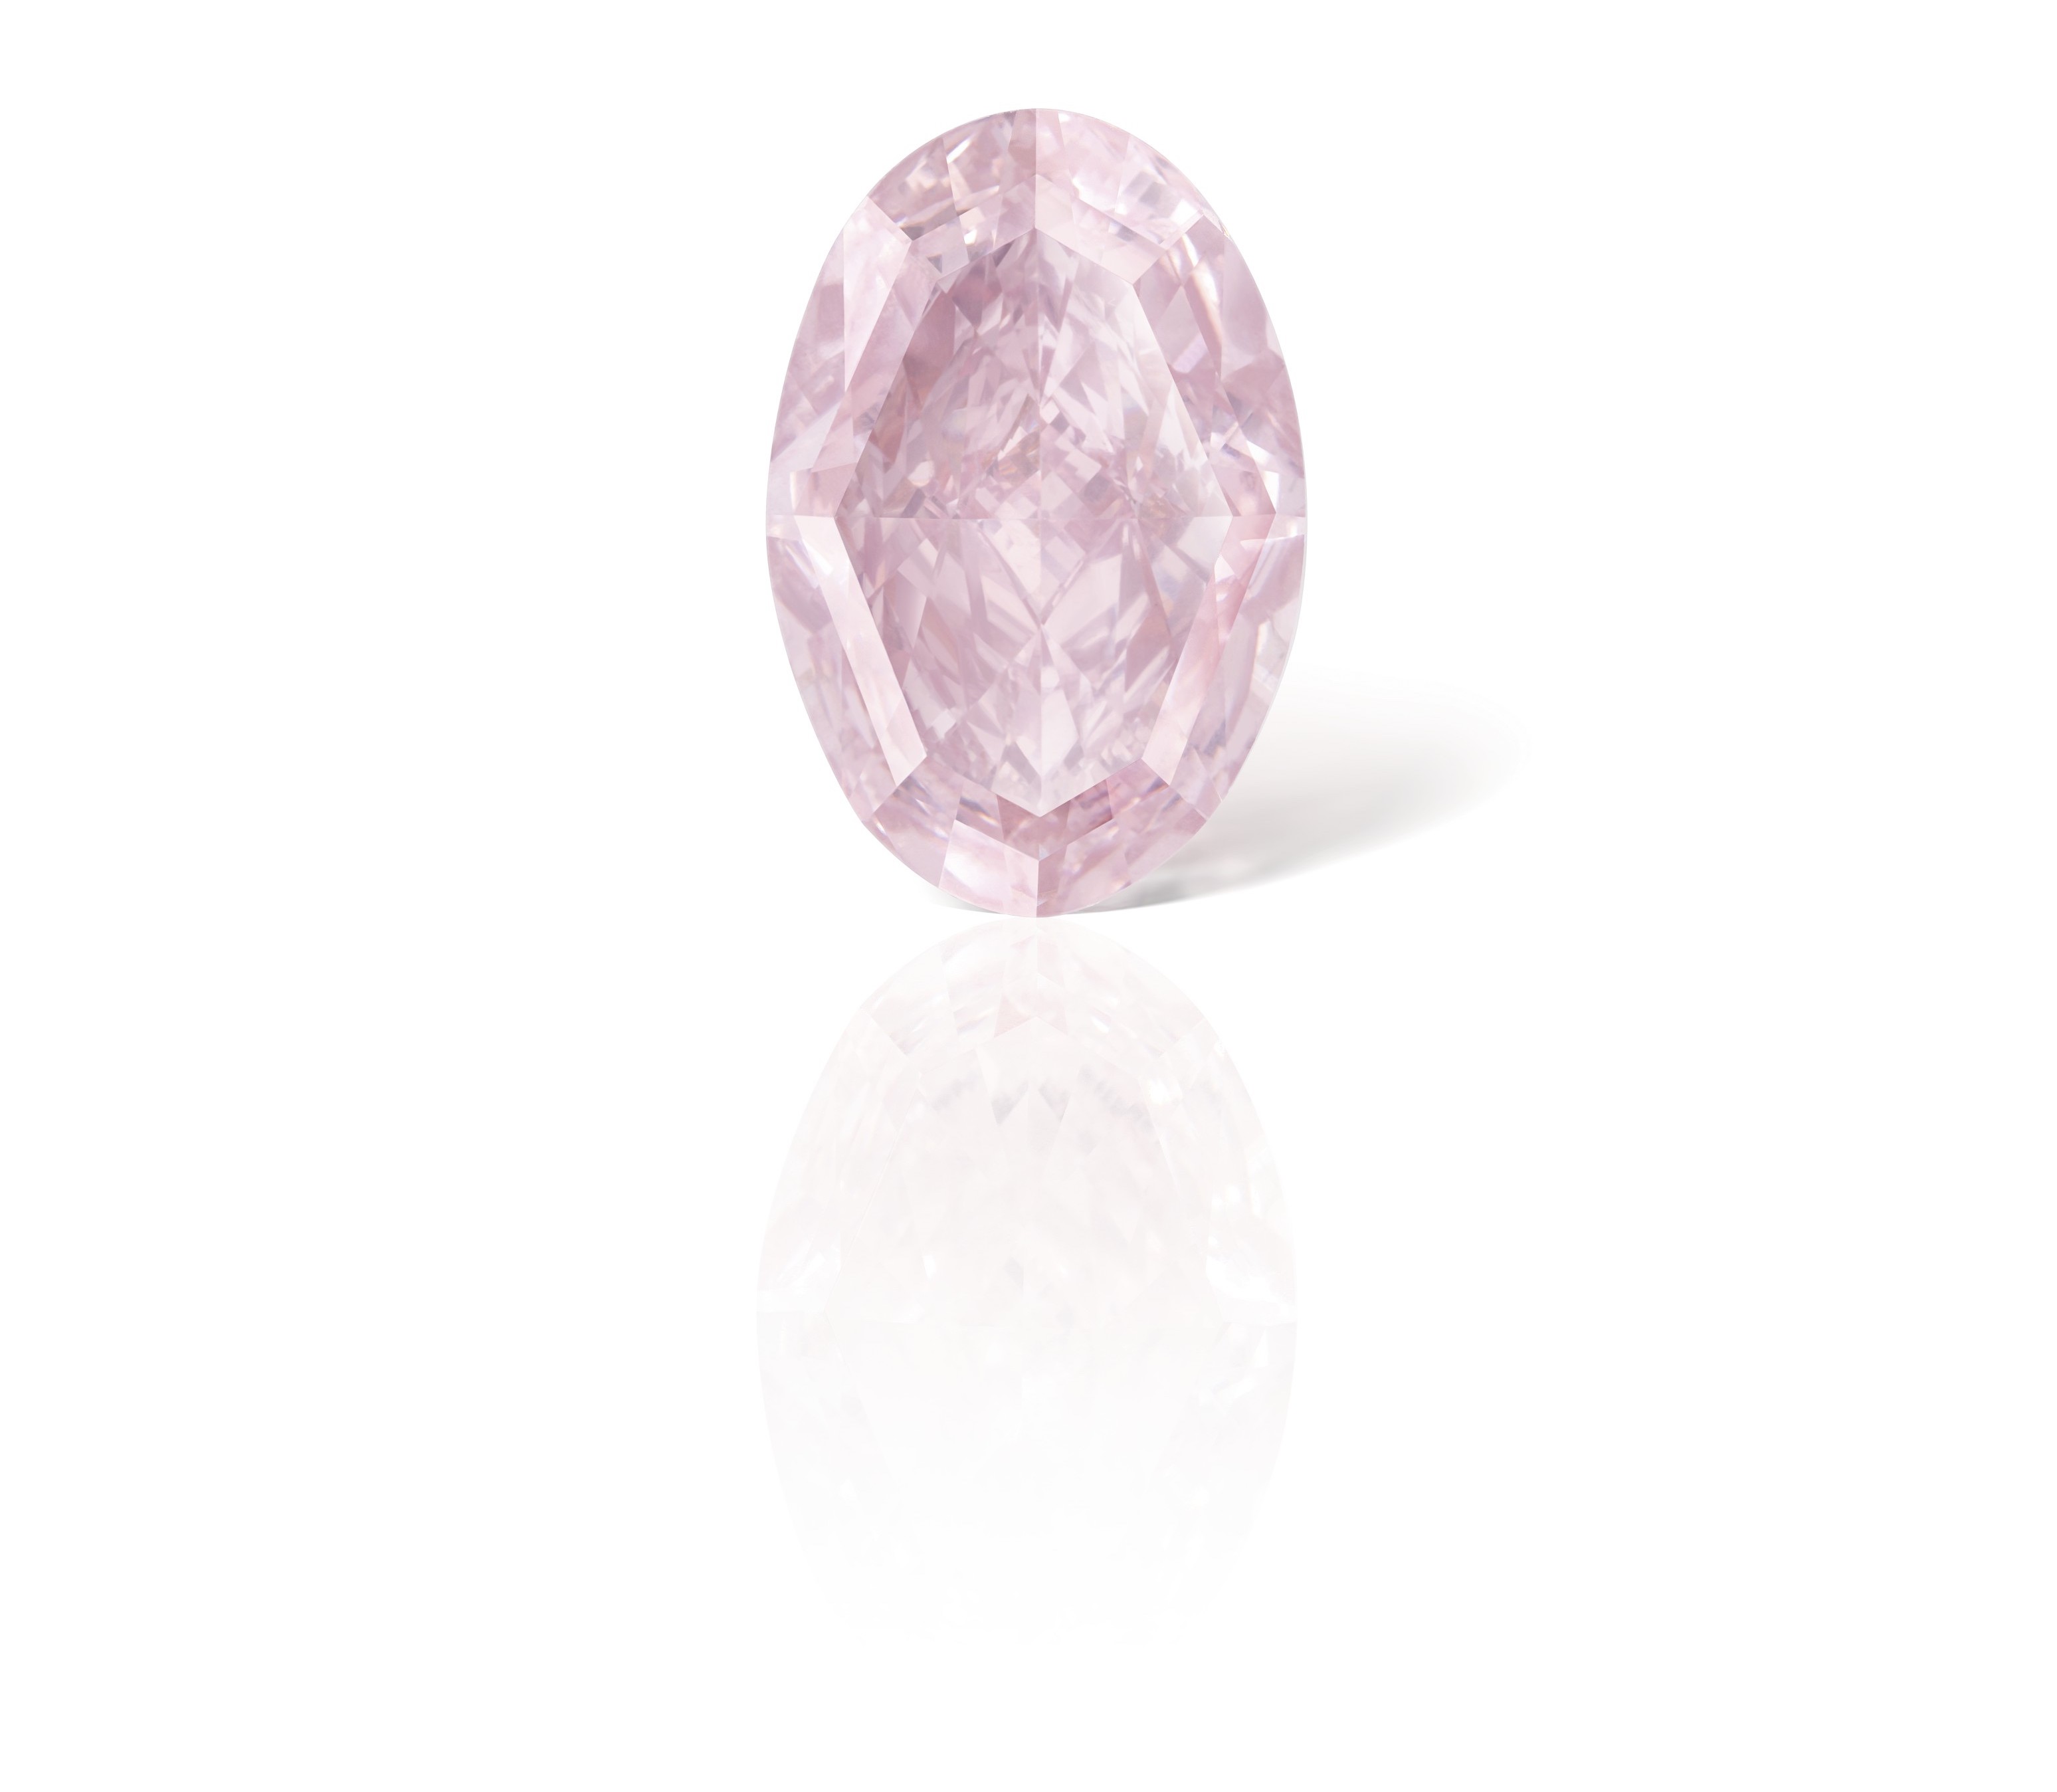 15.23 carats Fancy Intense Pink colour VS1 clarity type IIa CHF 7000000 11000000 2